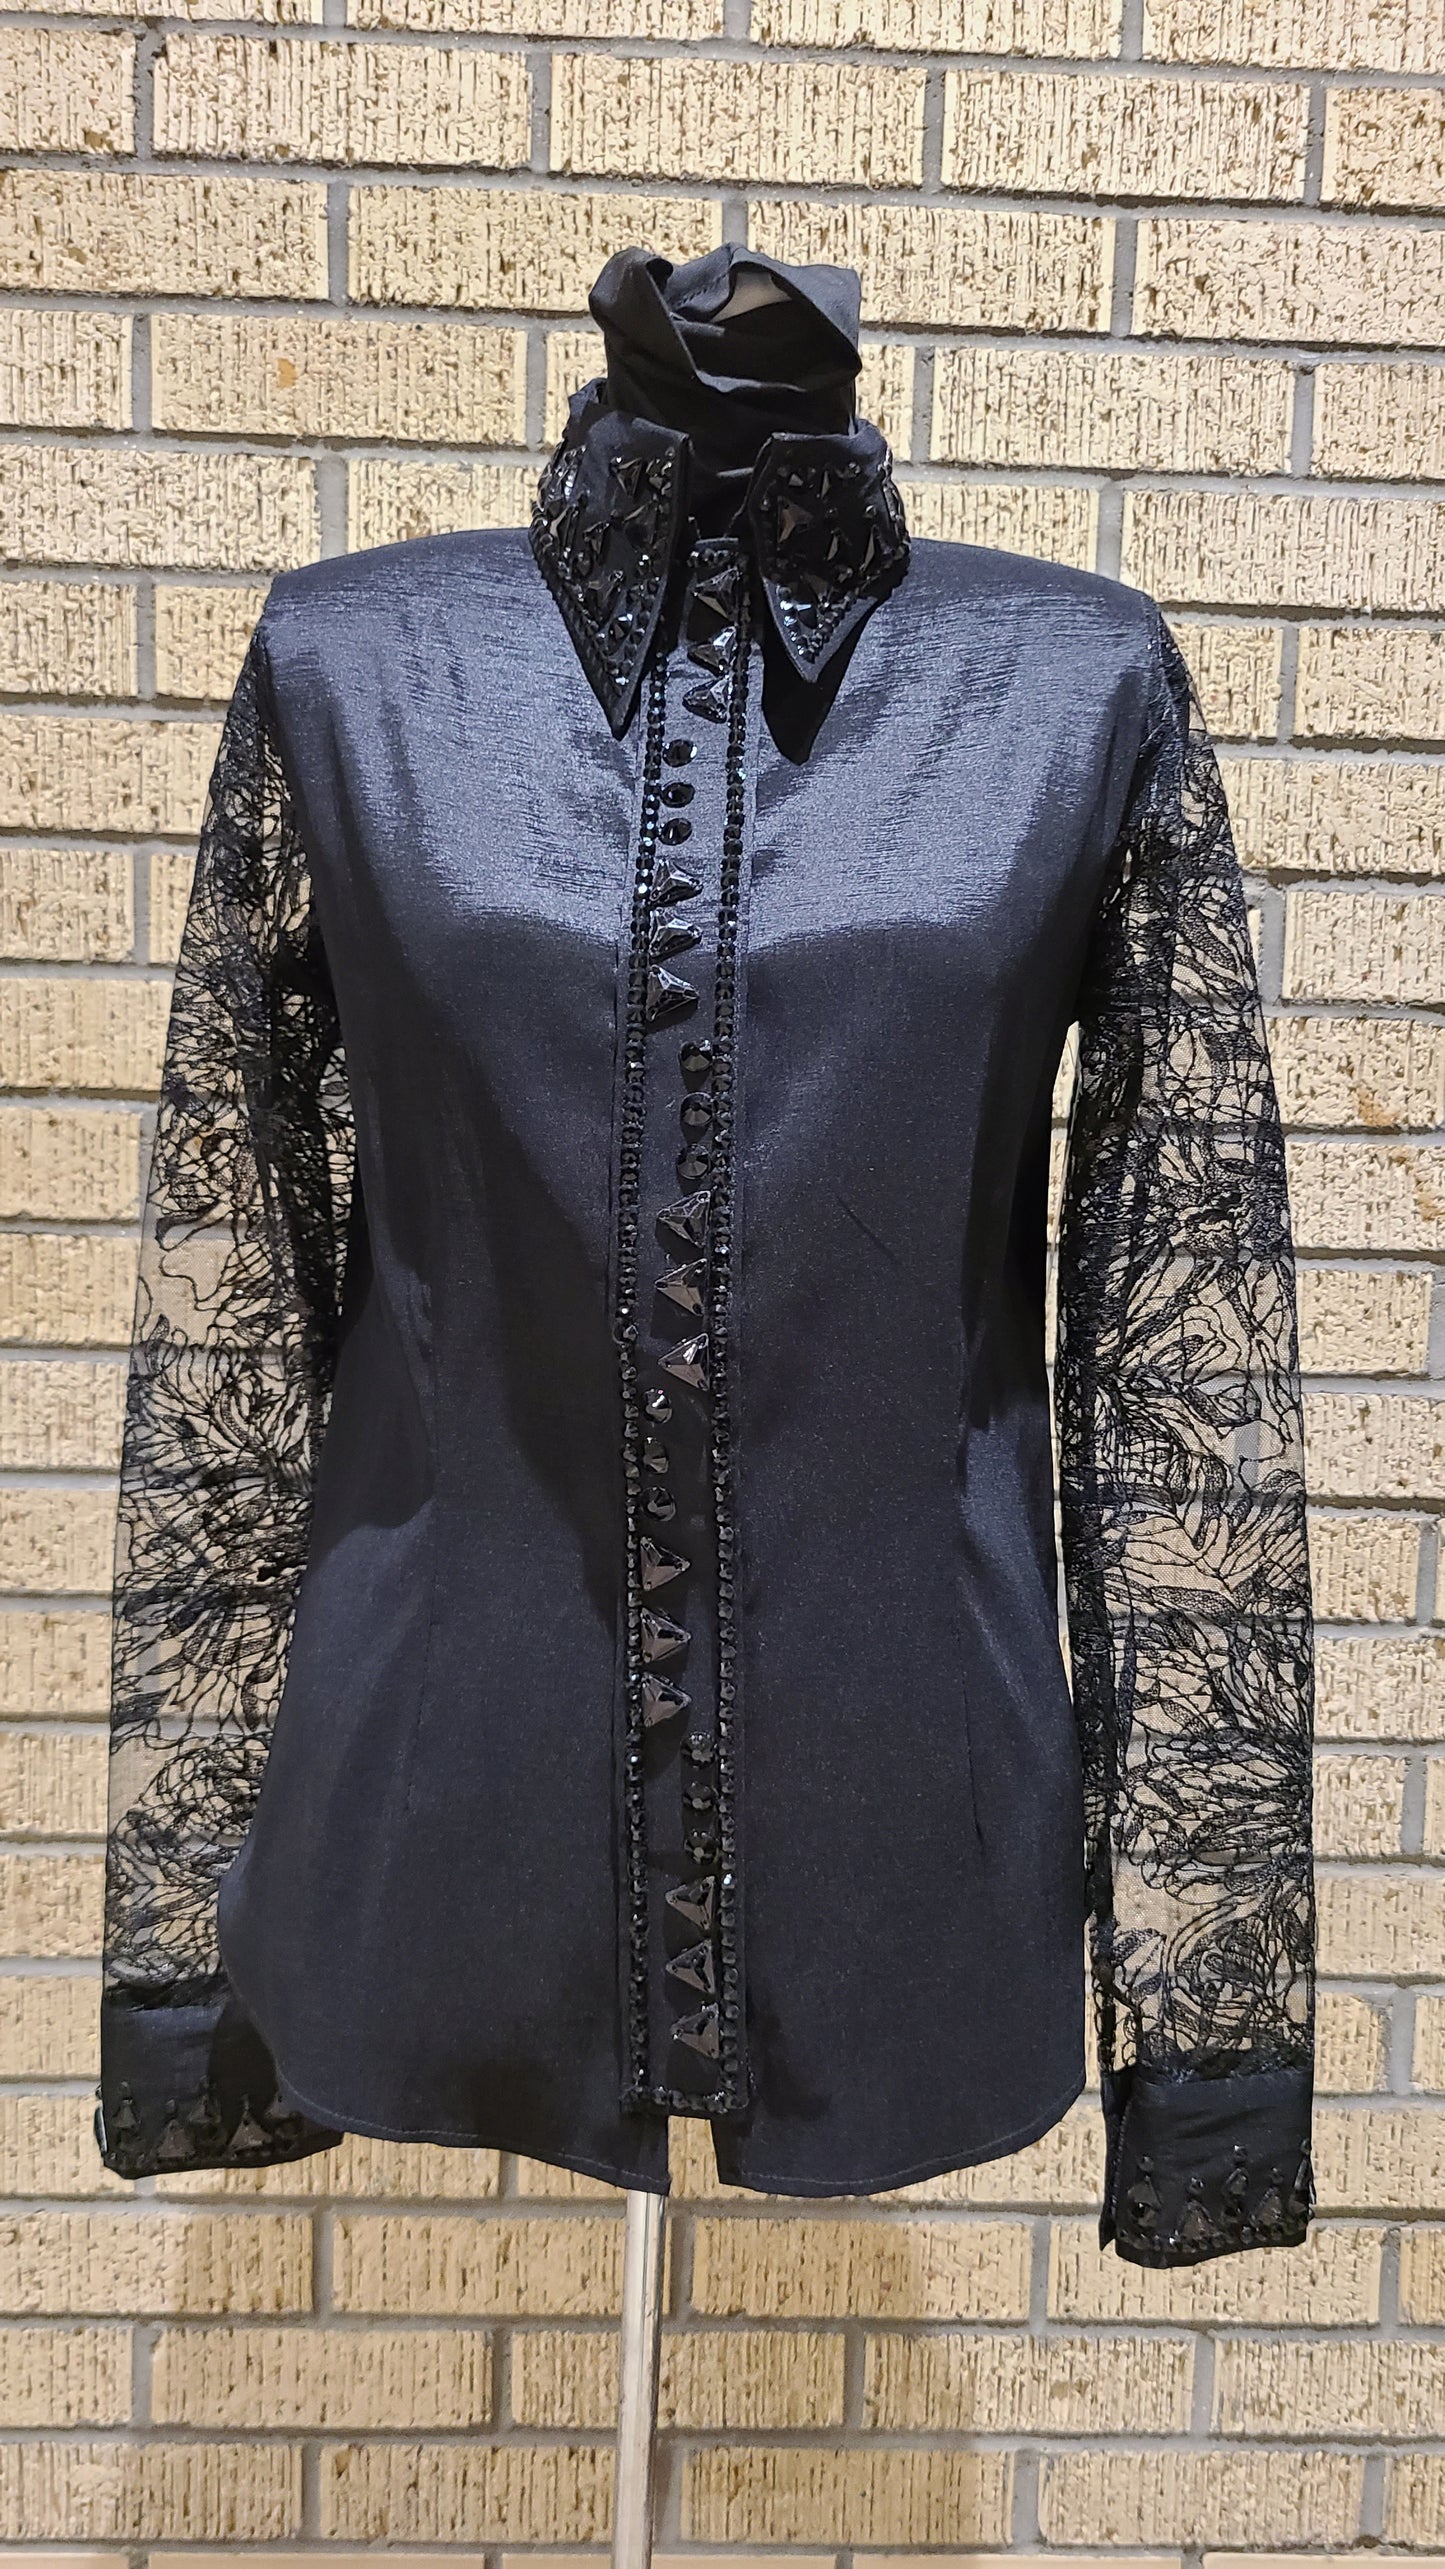 size small black day shirt stretch taffeta with black accents and lace sleeeves